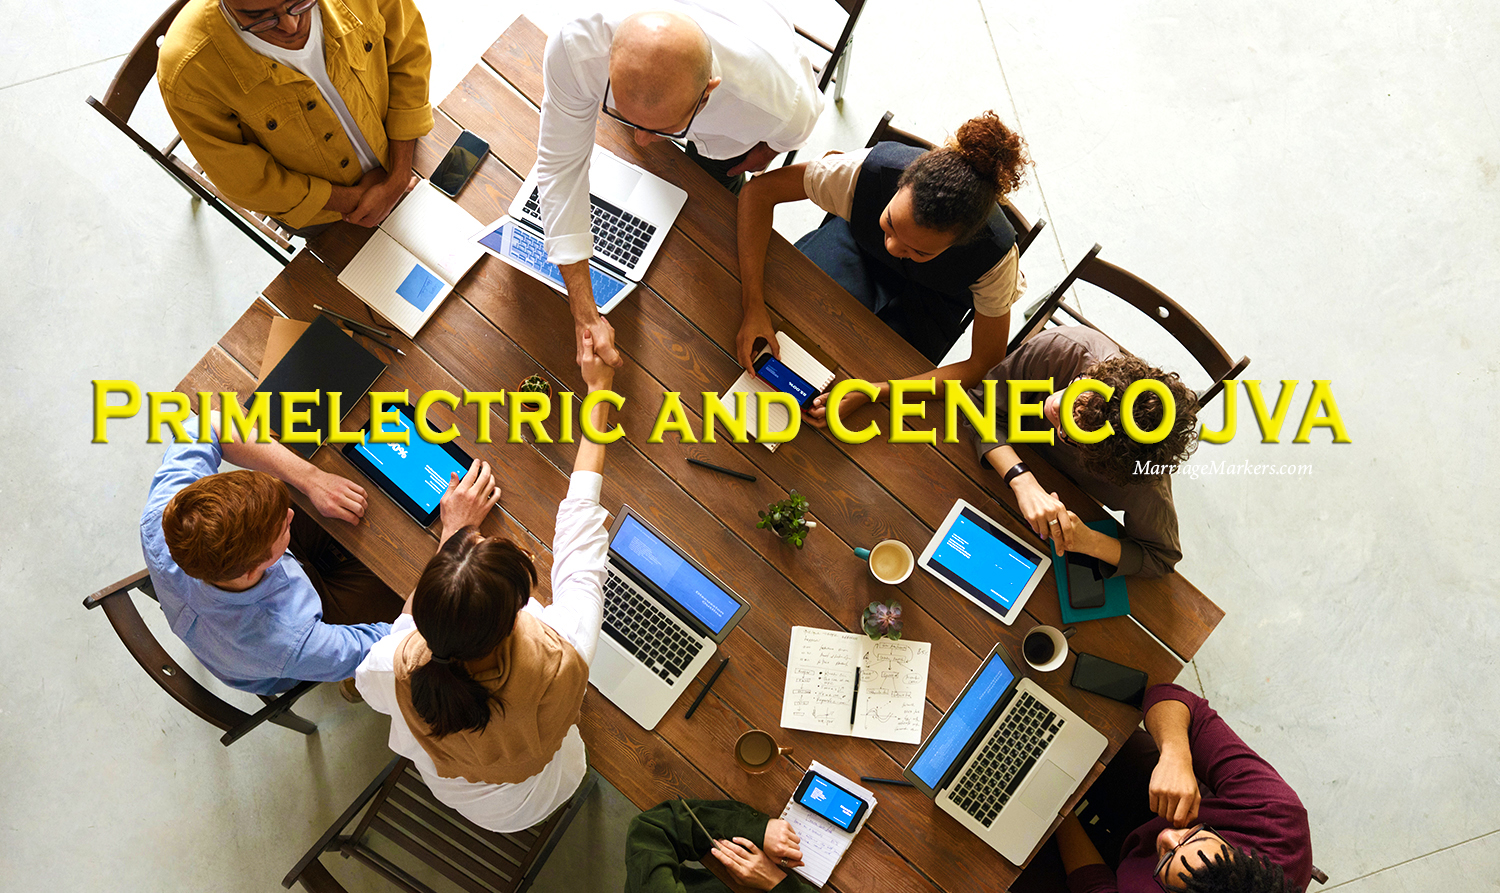 Primelectric - CENECO JVA - power distribution utility - electricity bill - who owns Primelectric - facts - CENECO bill - Bacolod City plebiscite - better electricity service - boardroom meeting